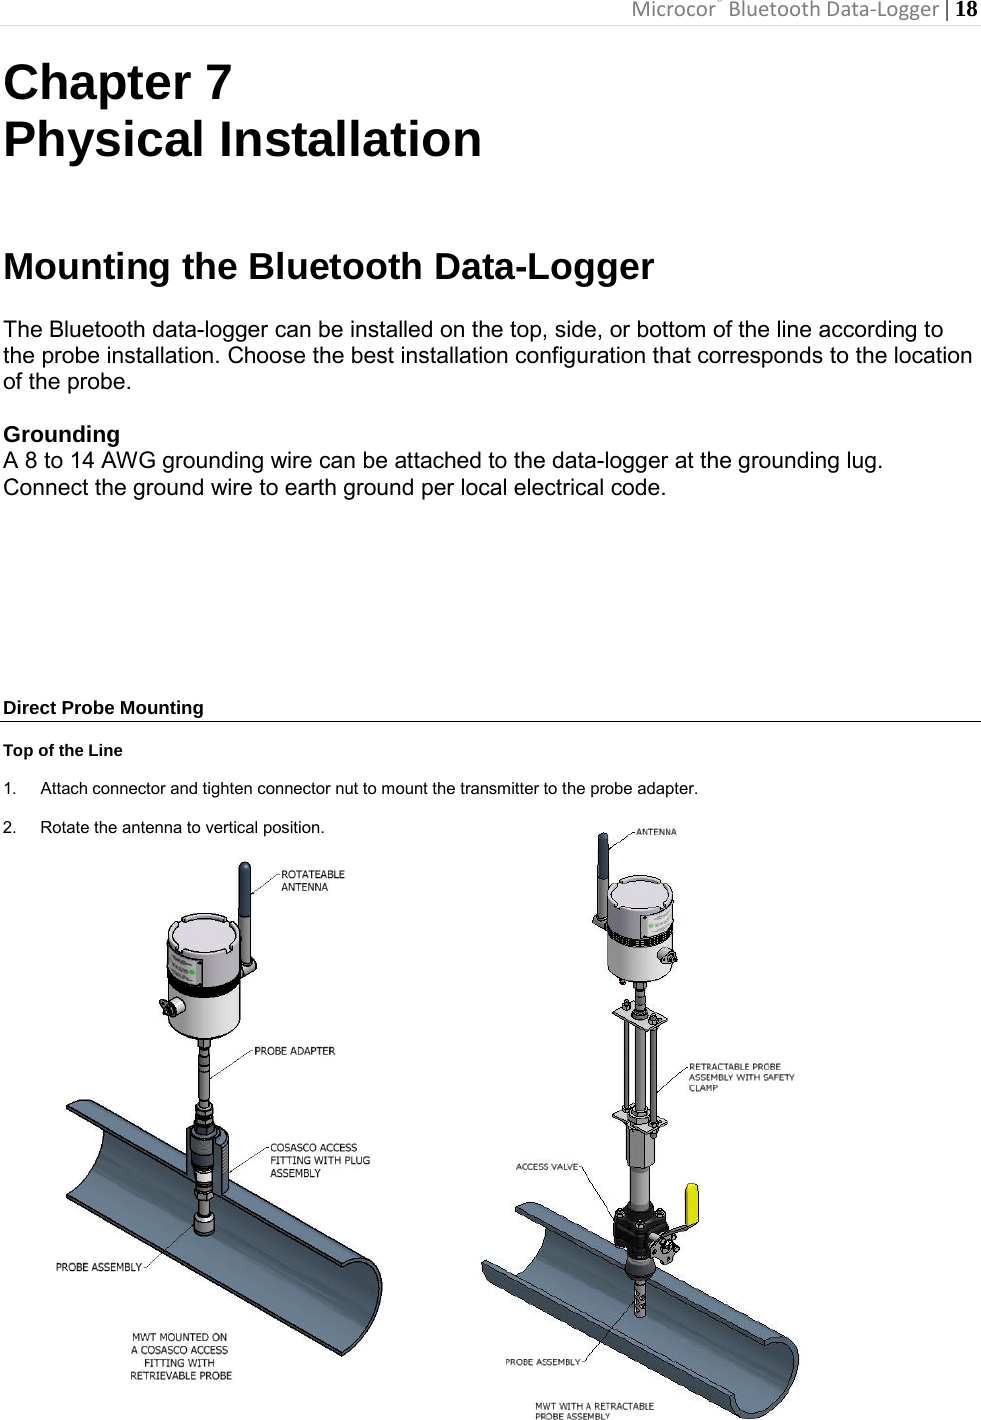 Microcor® Bluetooth Data-Logger | 18       Chapter 7 Physical Installation   Mounting the Bluetooth Data-Logger  The Bluetooth data-logger can be installed on the top, side, or bottom of the line according to the probe installation. Choose the best installation configuration that corresponds to the location of the probe.  Grounding A 8 to 14 AWG grounding wire can be attached to the data-logger at the grounding lug.  Connect the ground wire to earth ground per local electrical code.         Direct Probe Mounting  Top of the Line  1. Attach connector and tighten connector nut to mount the transmitter to the probe adapter.  2. Rotate the antenna to vertical position.                               